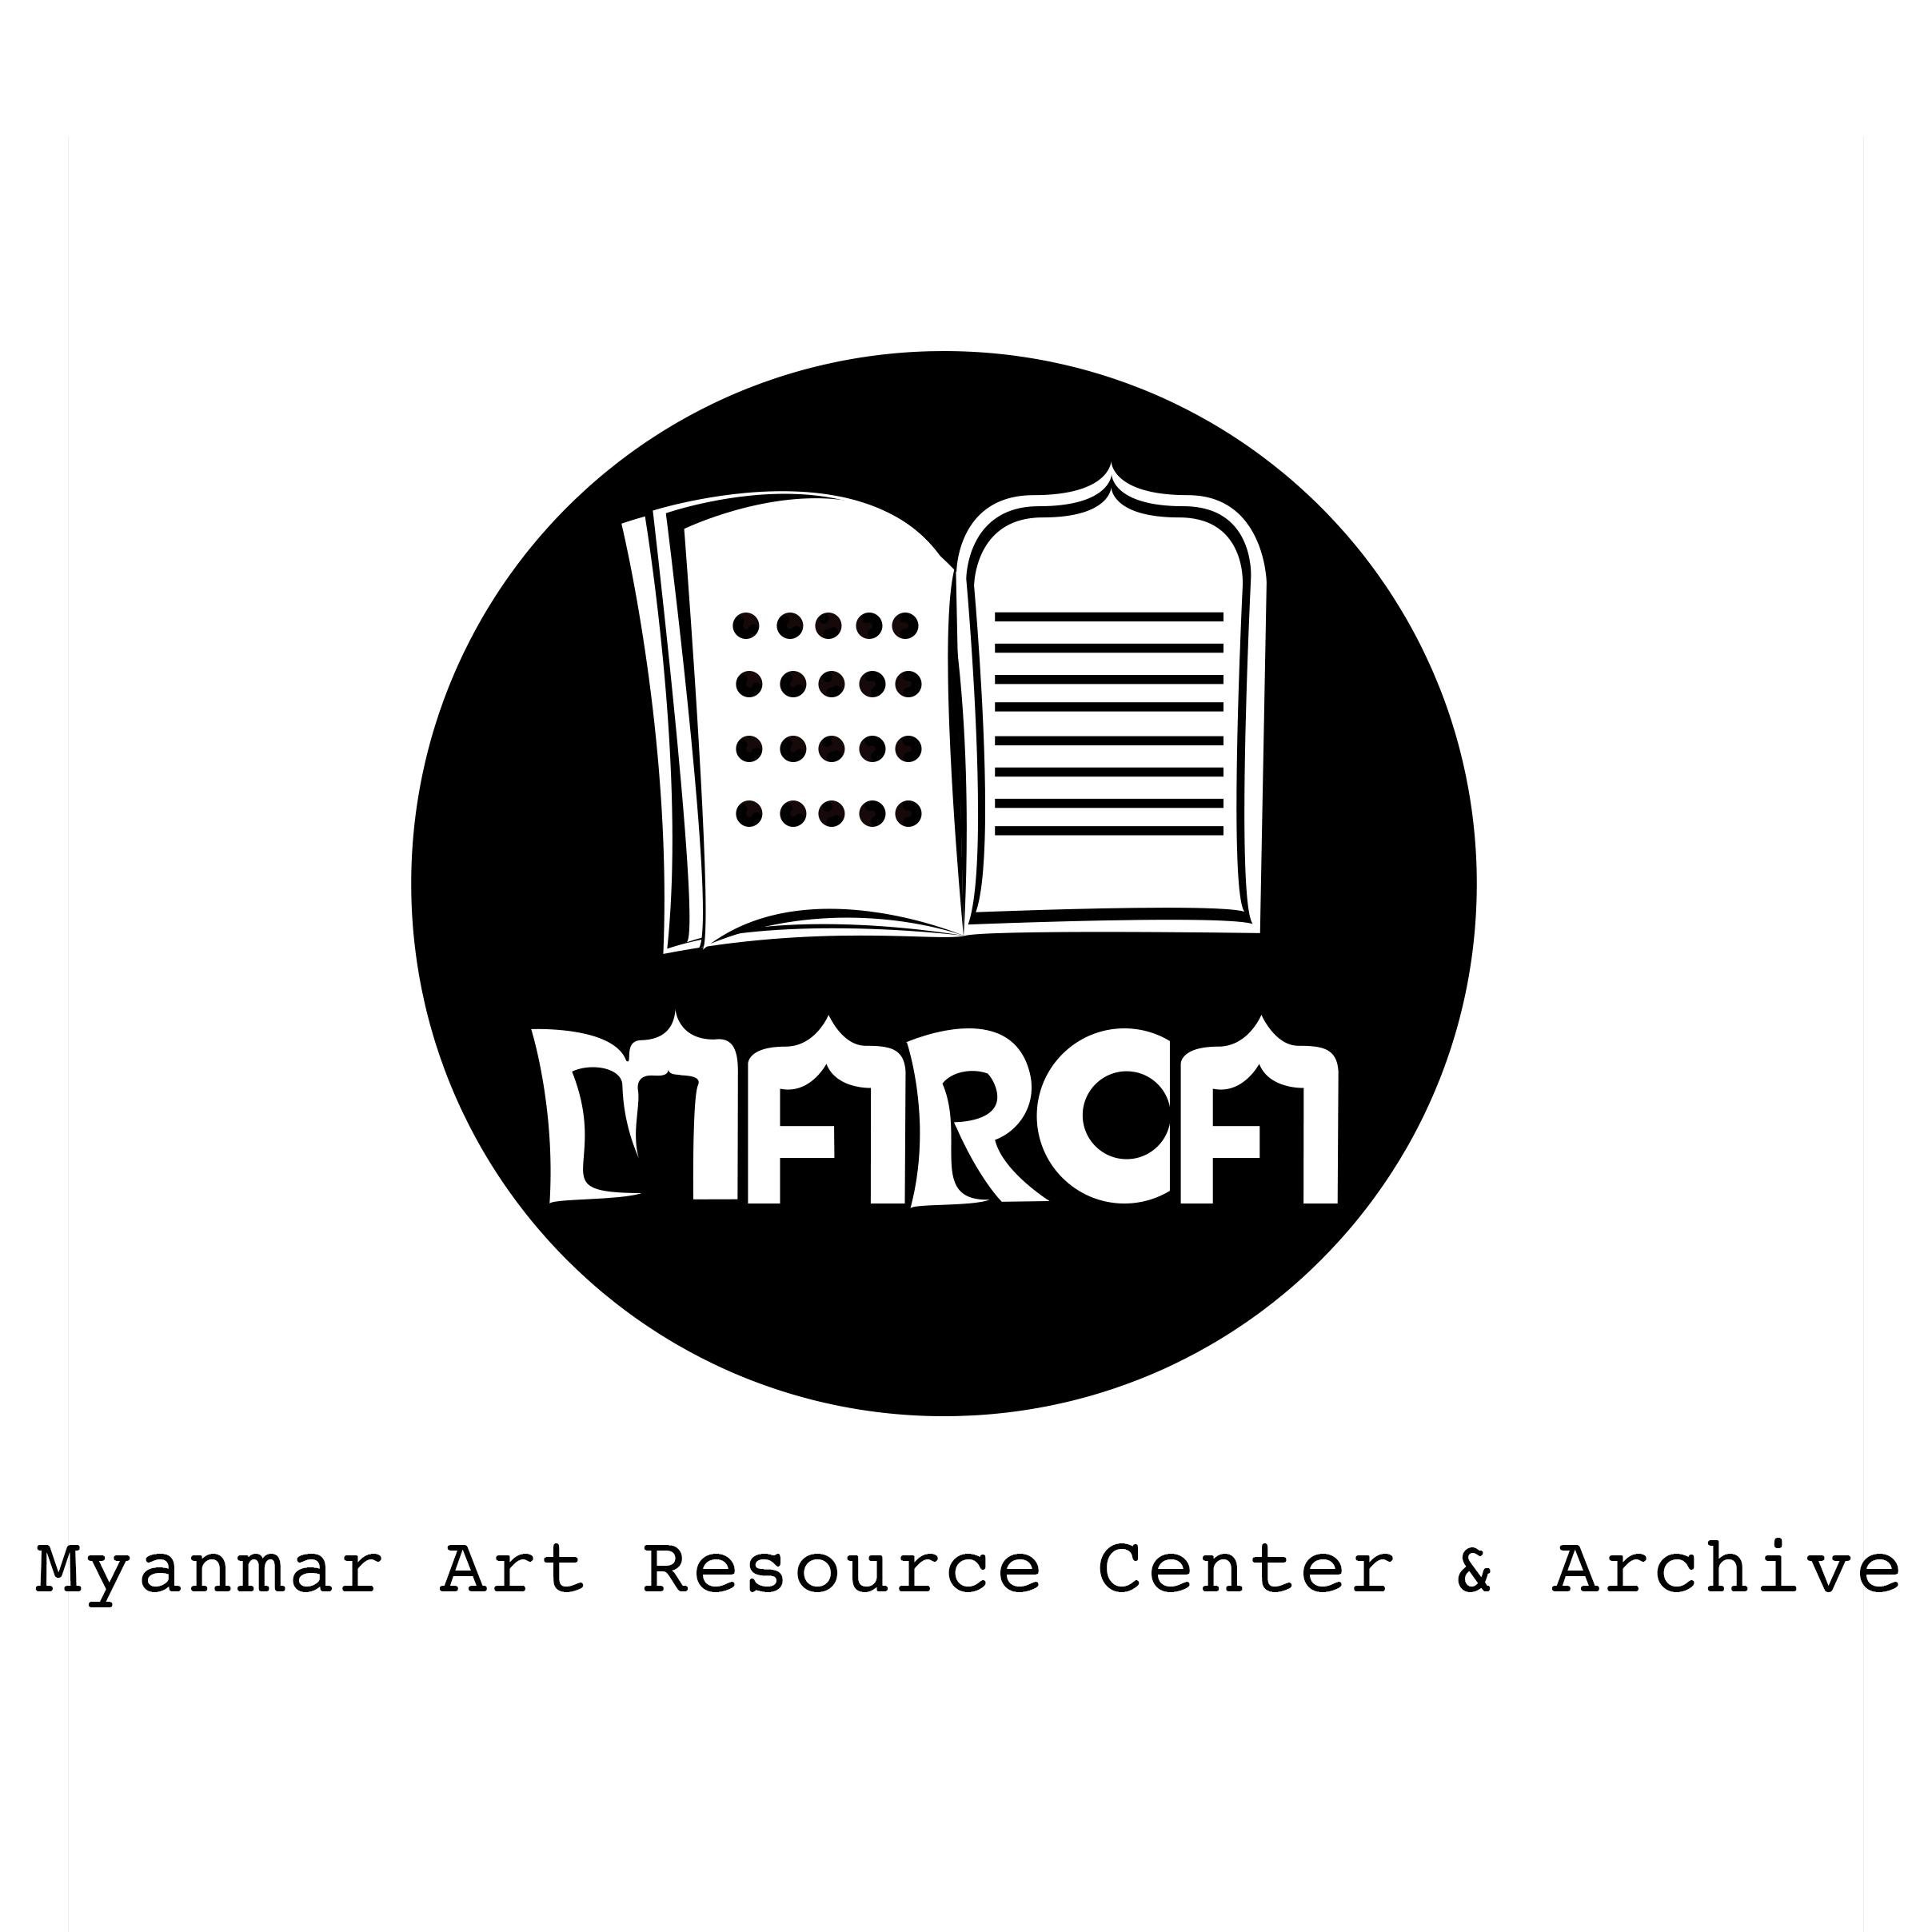 Art education in Myanmar, online, accessible, uncensored, for all